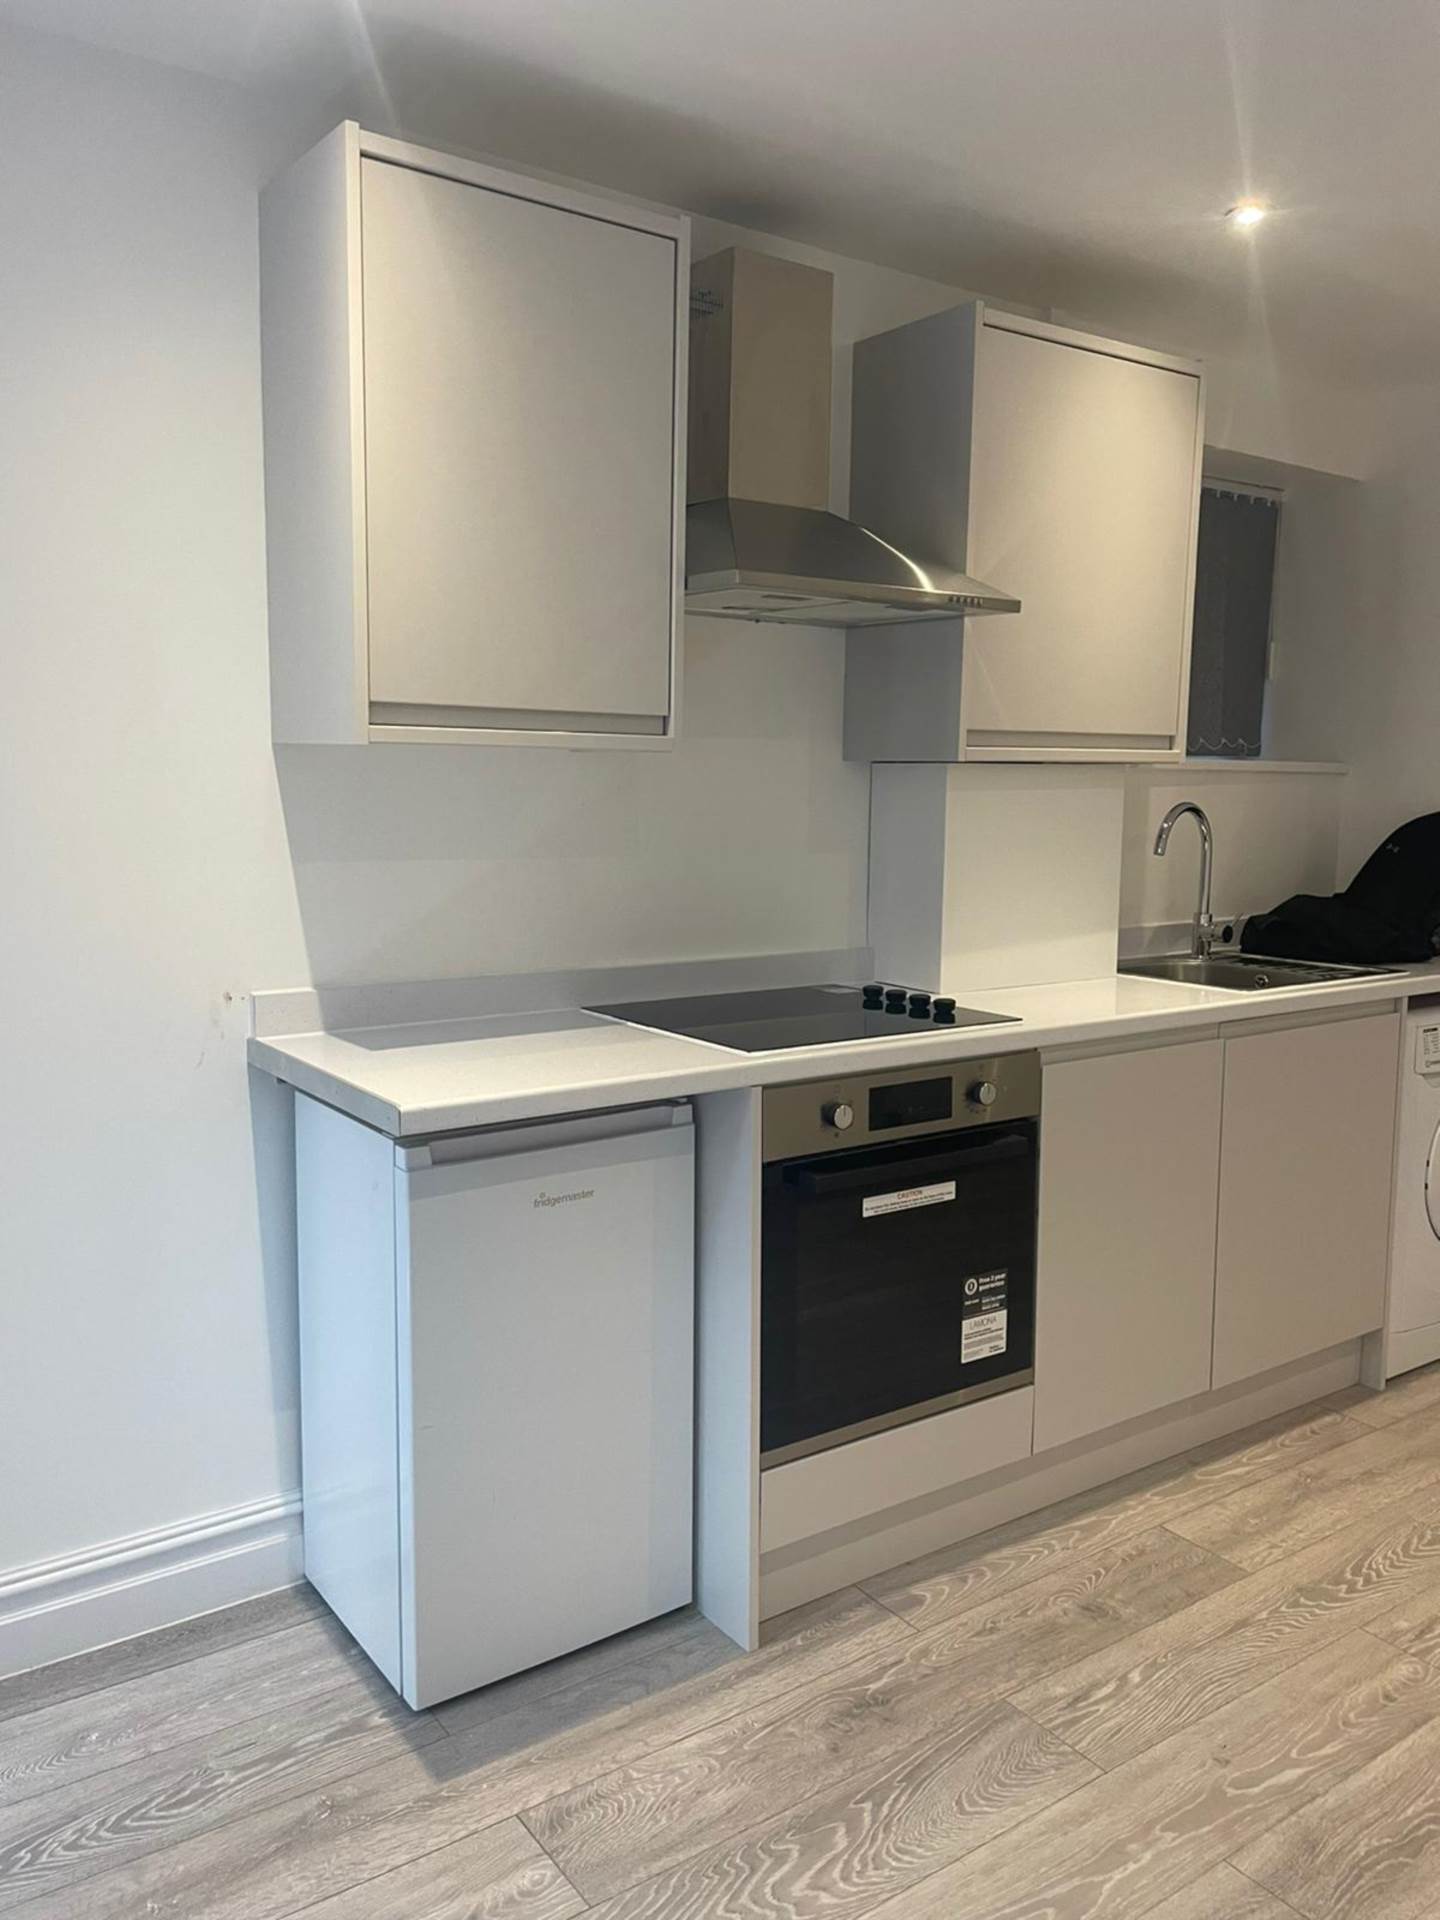 1 bed Flat for rent in London. From Ashley Samuel - London - West